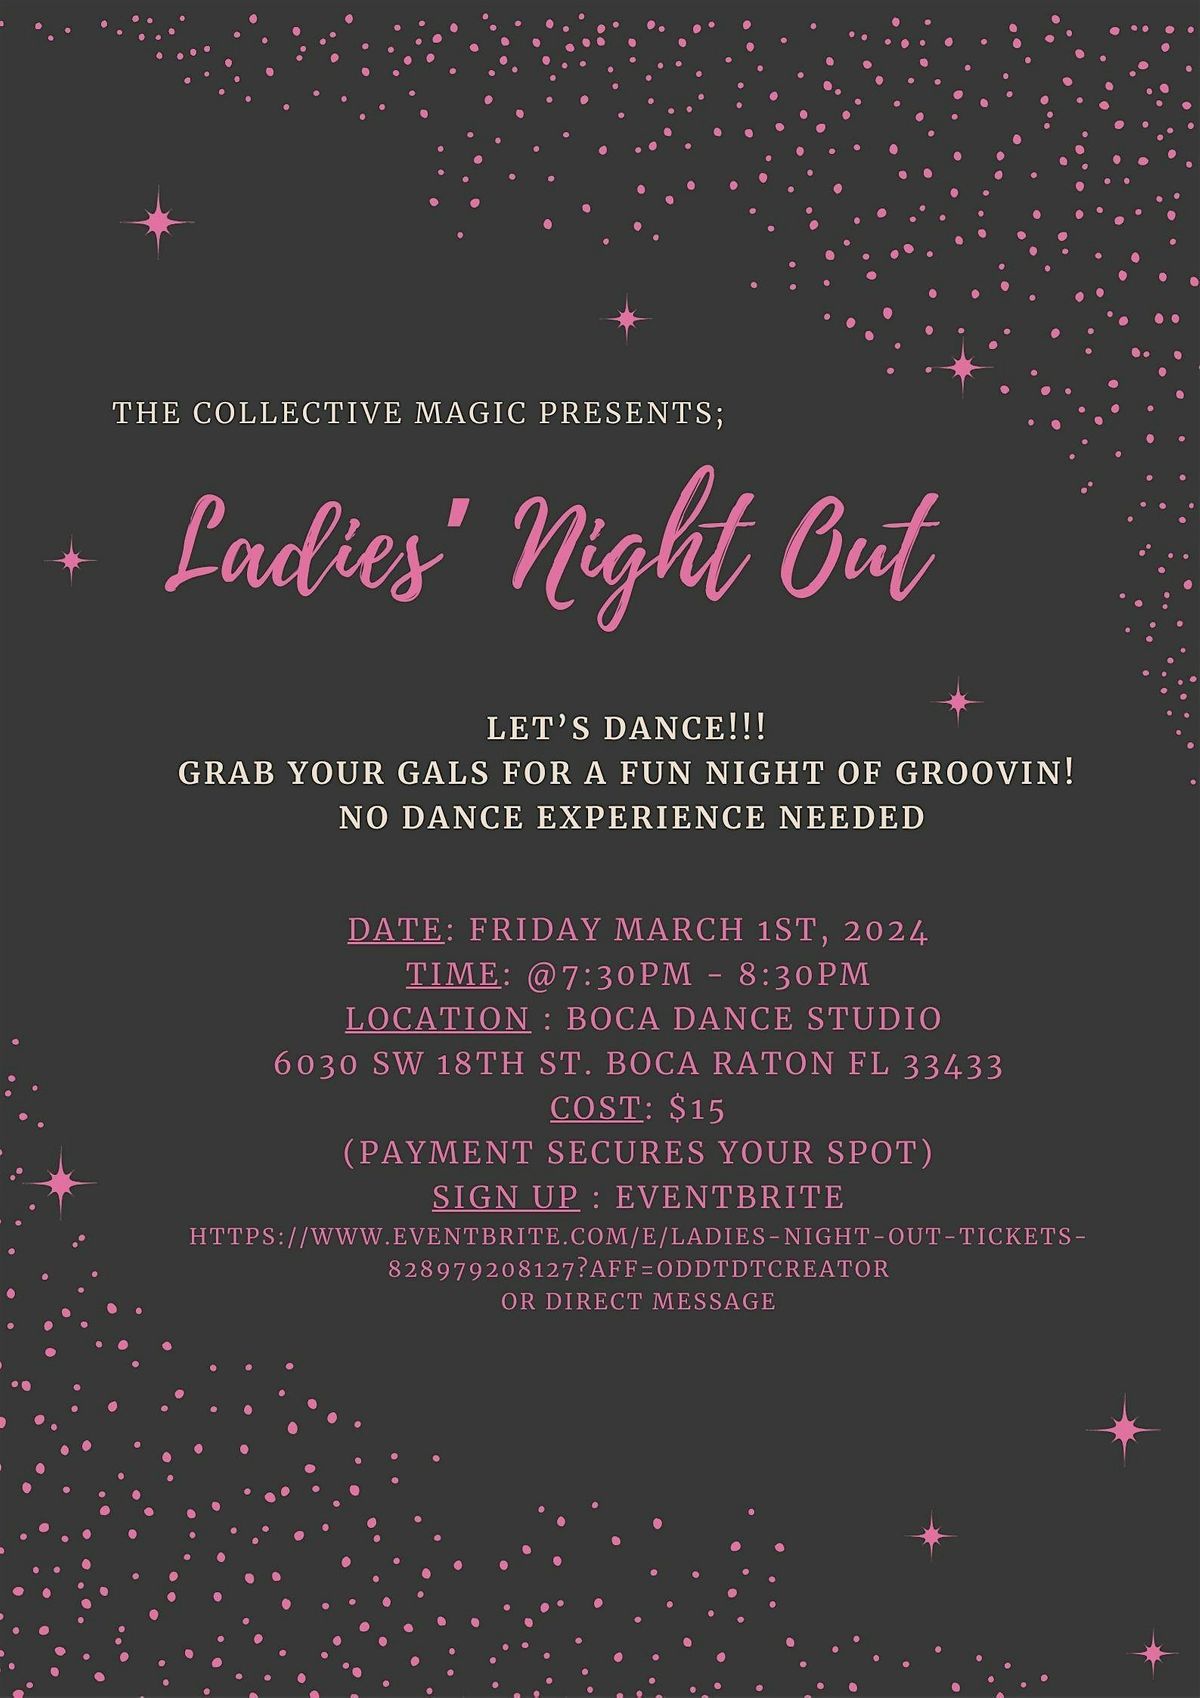 Ladies' Night Out